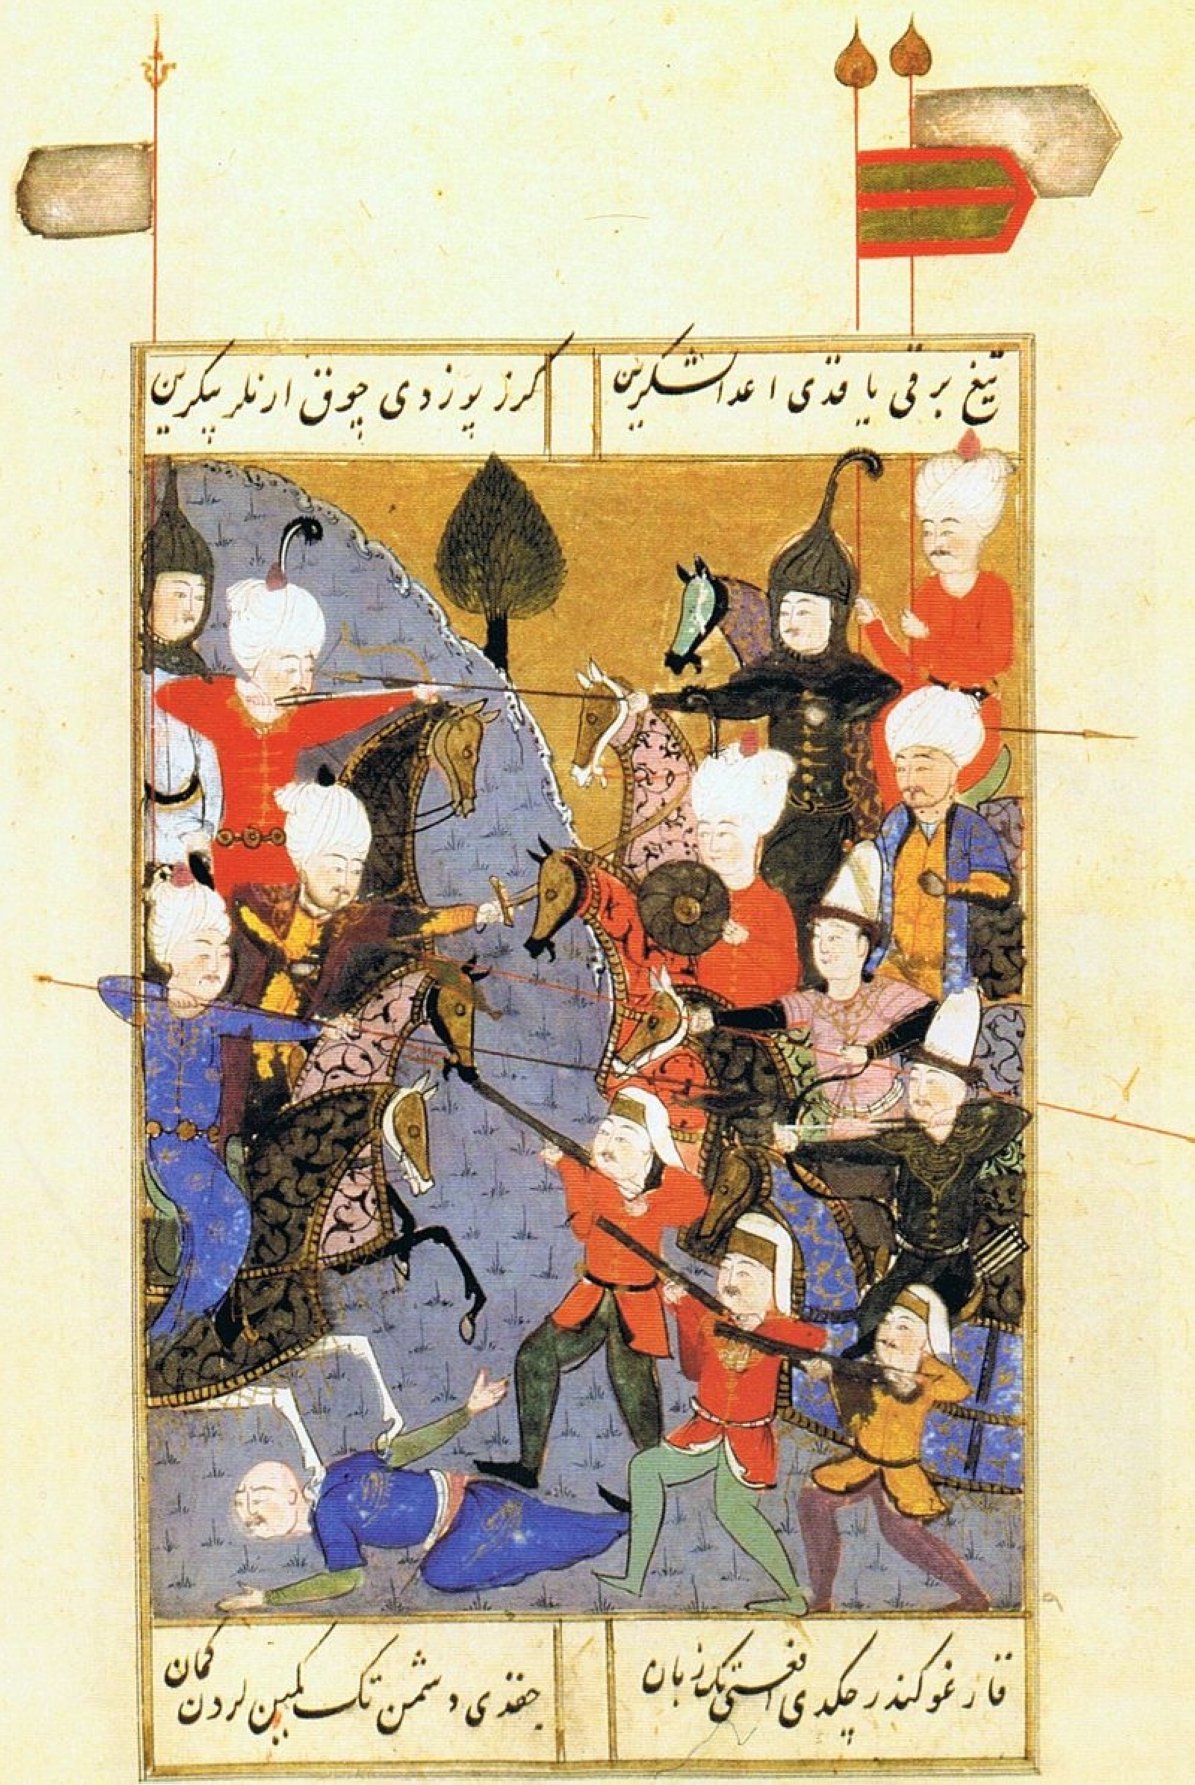 A 16th-century miniature shows the struggle between Sultan Selim and Şehzade Ahmed.